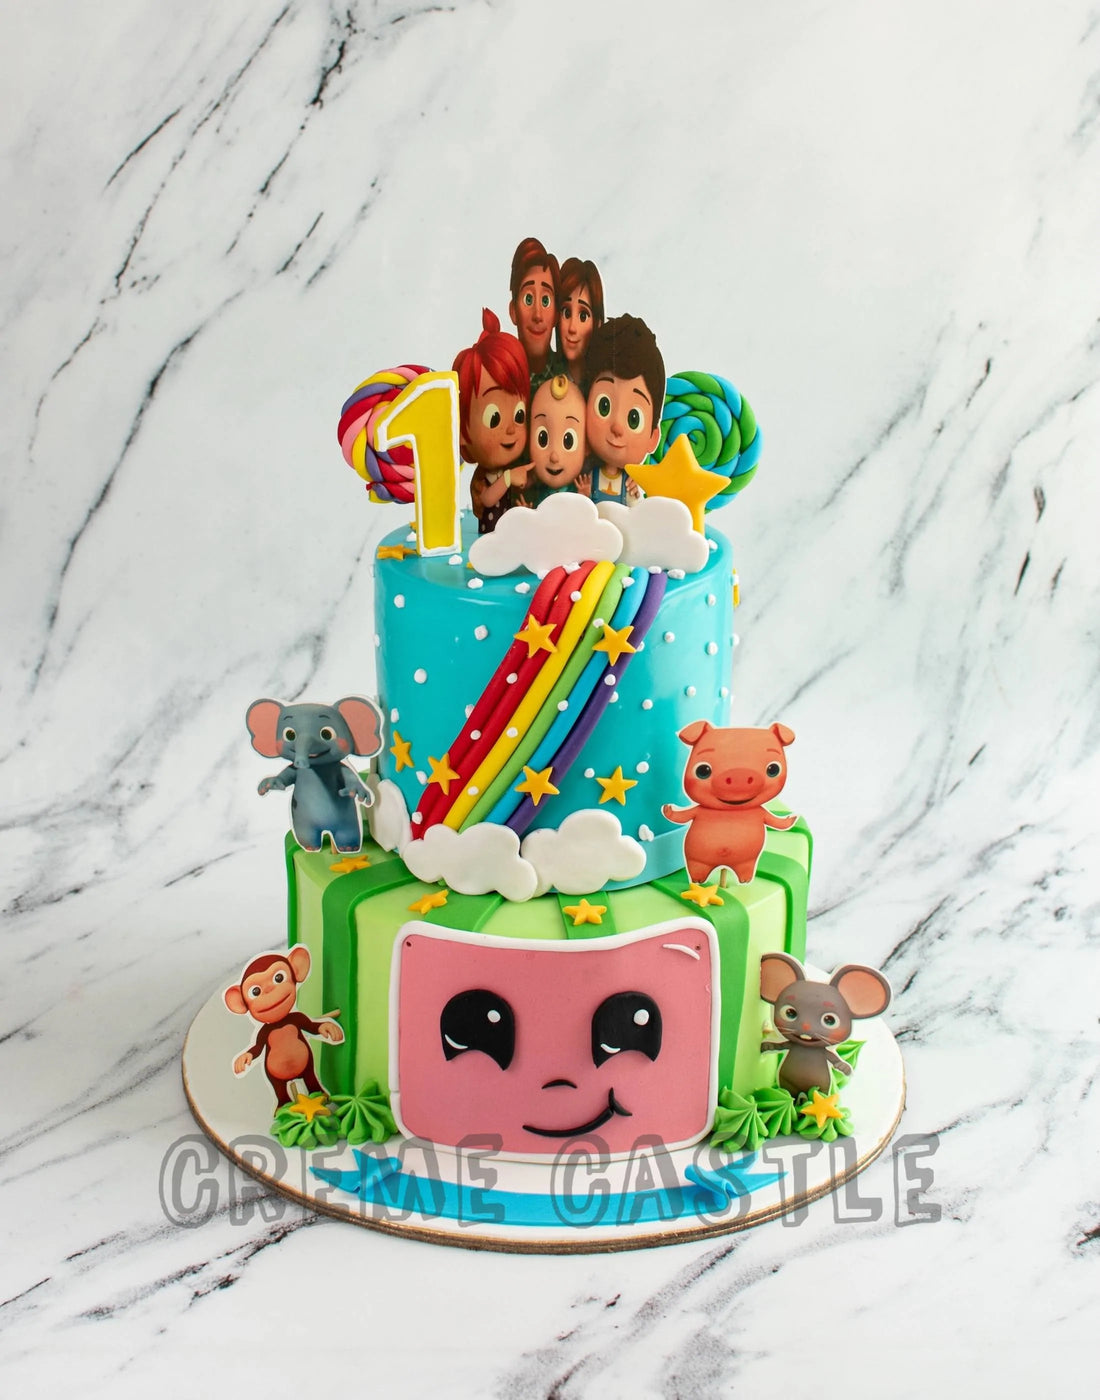 Cocomelon Cake with Jungle Theme by Creme Castle